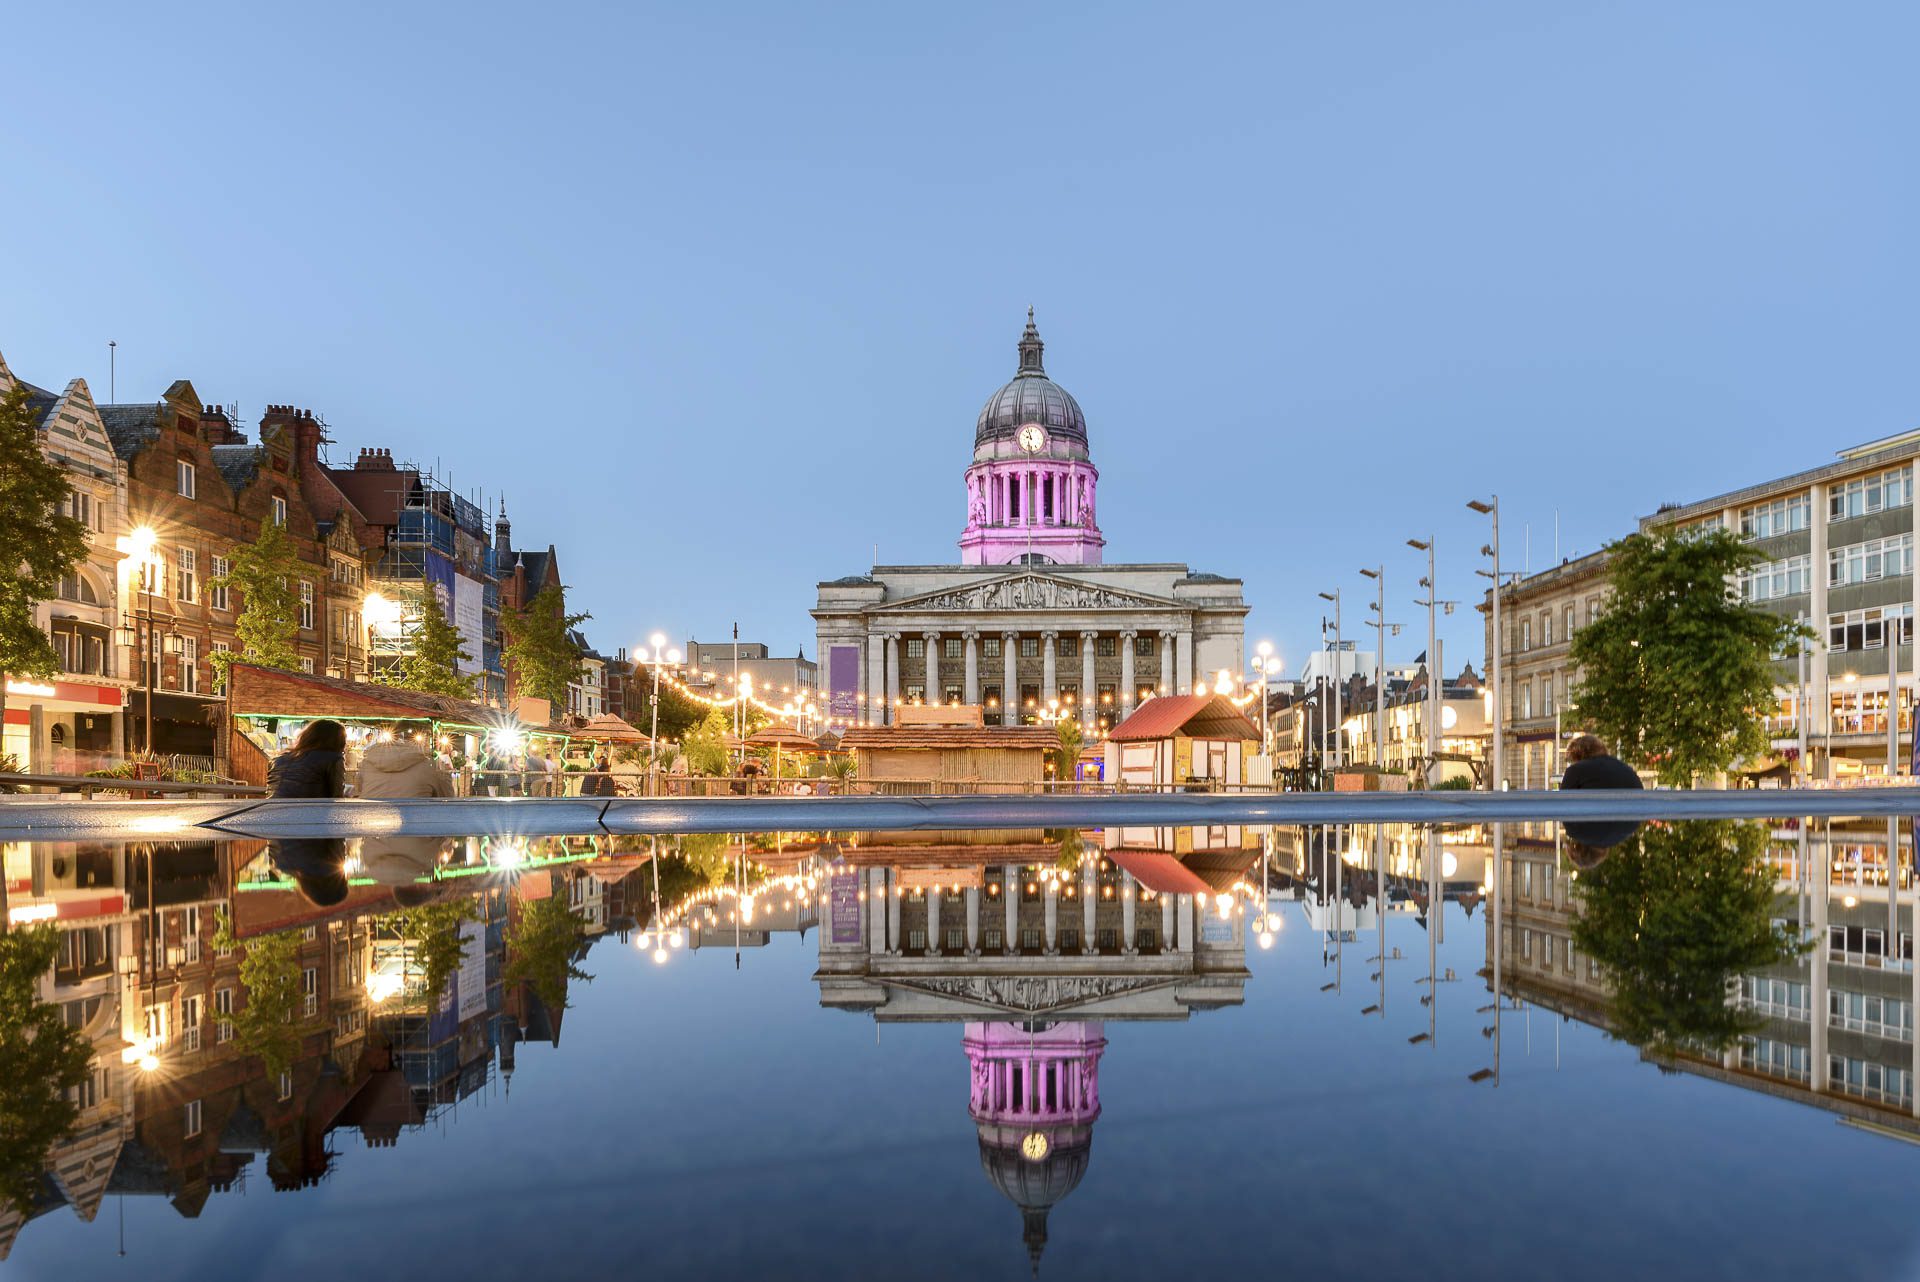 View of Nottingham Town Hall